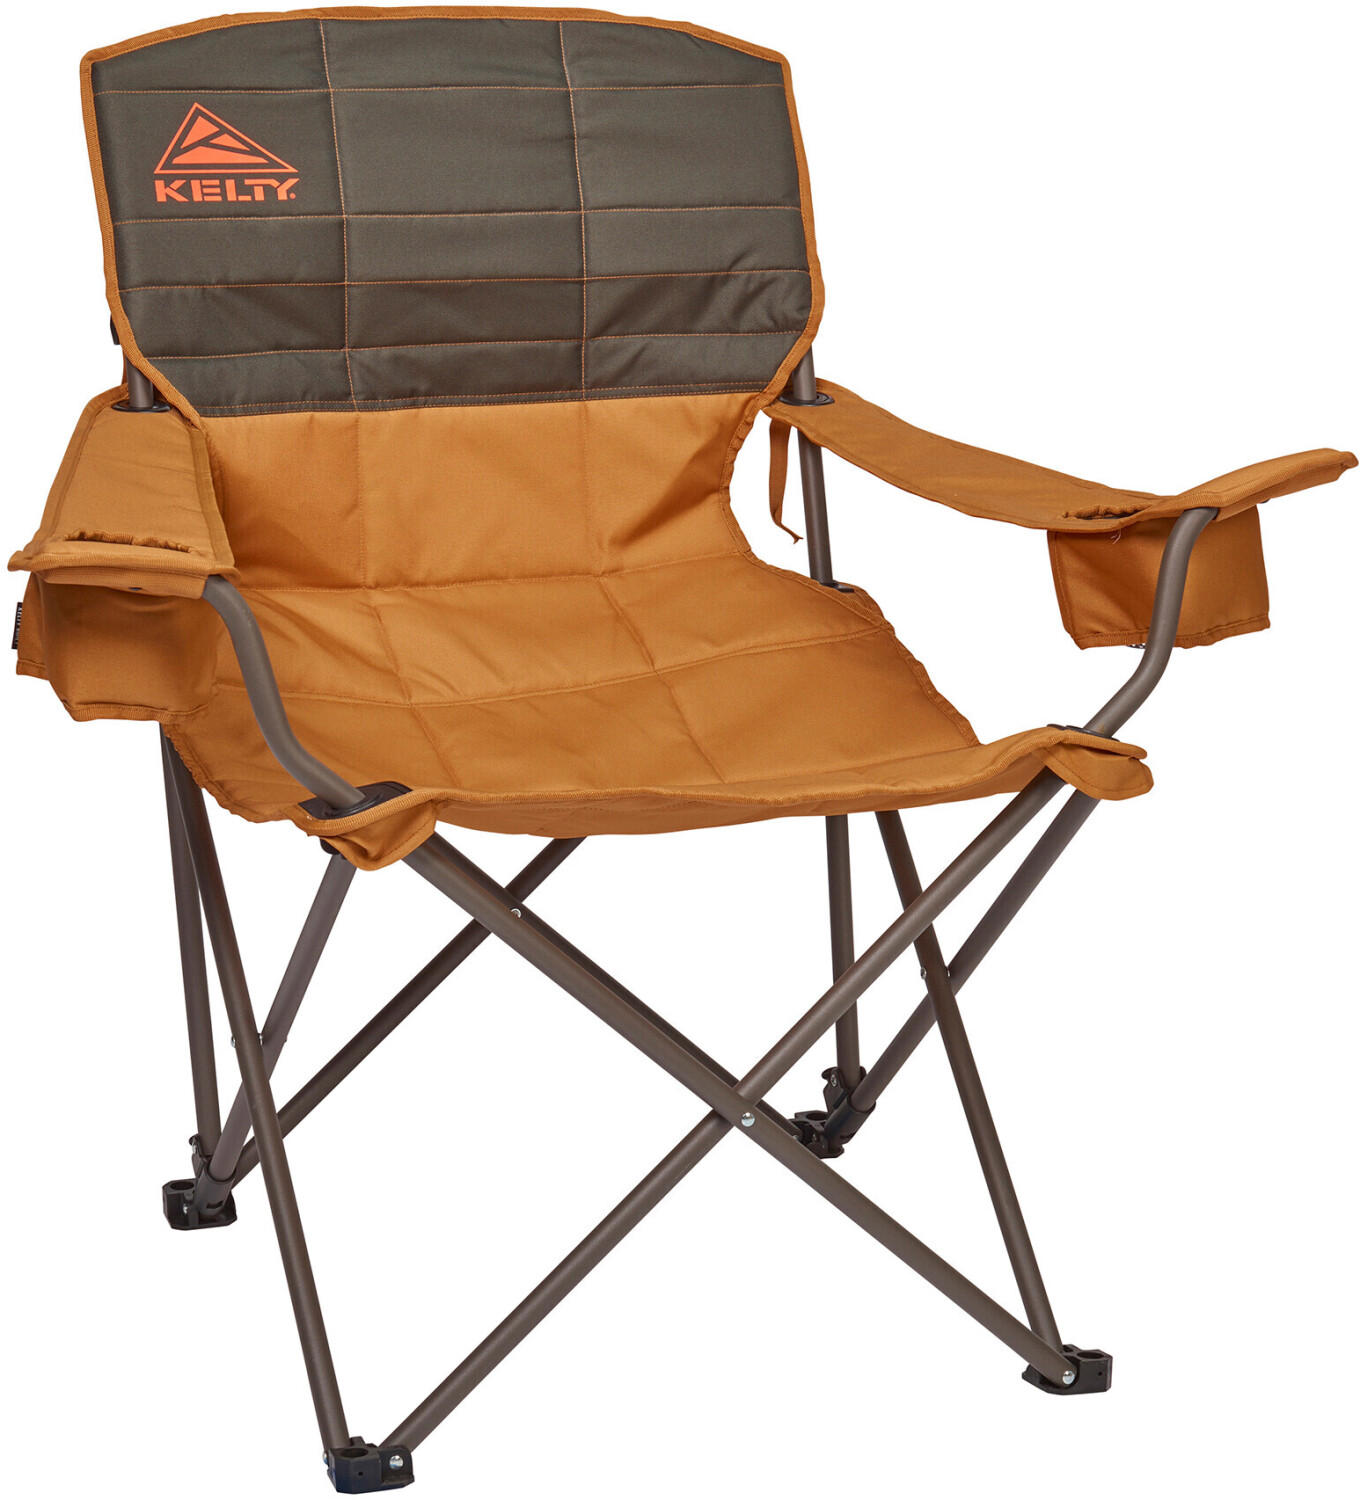 Kelty Deluxe Camping Lounge Chair